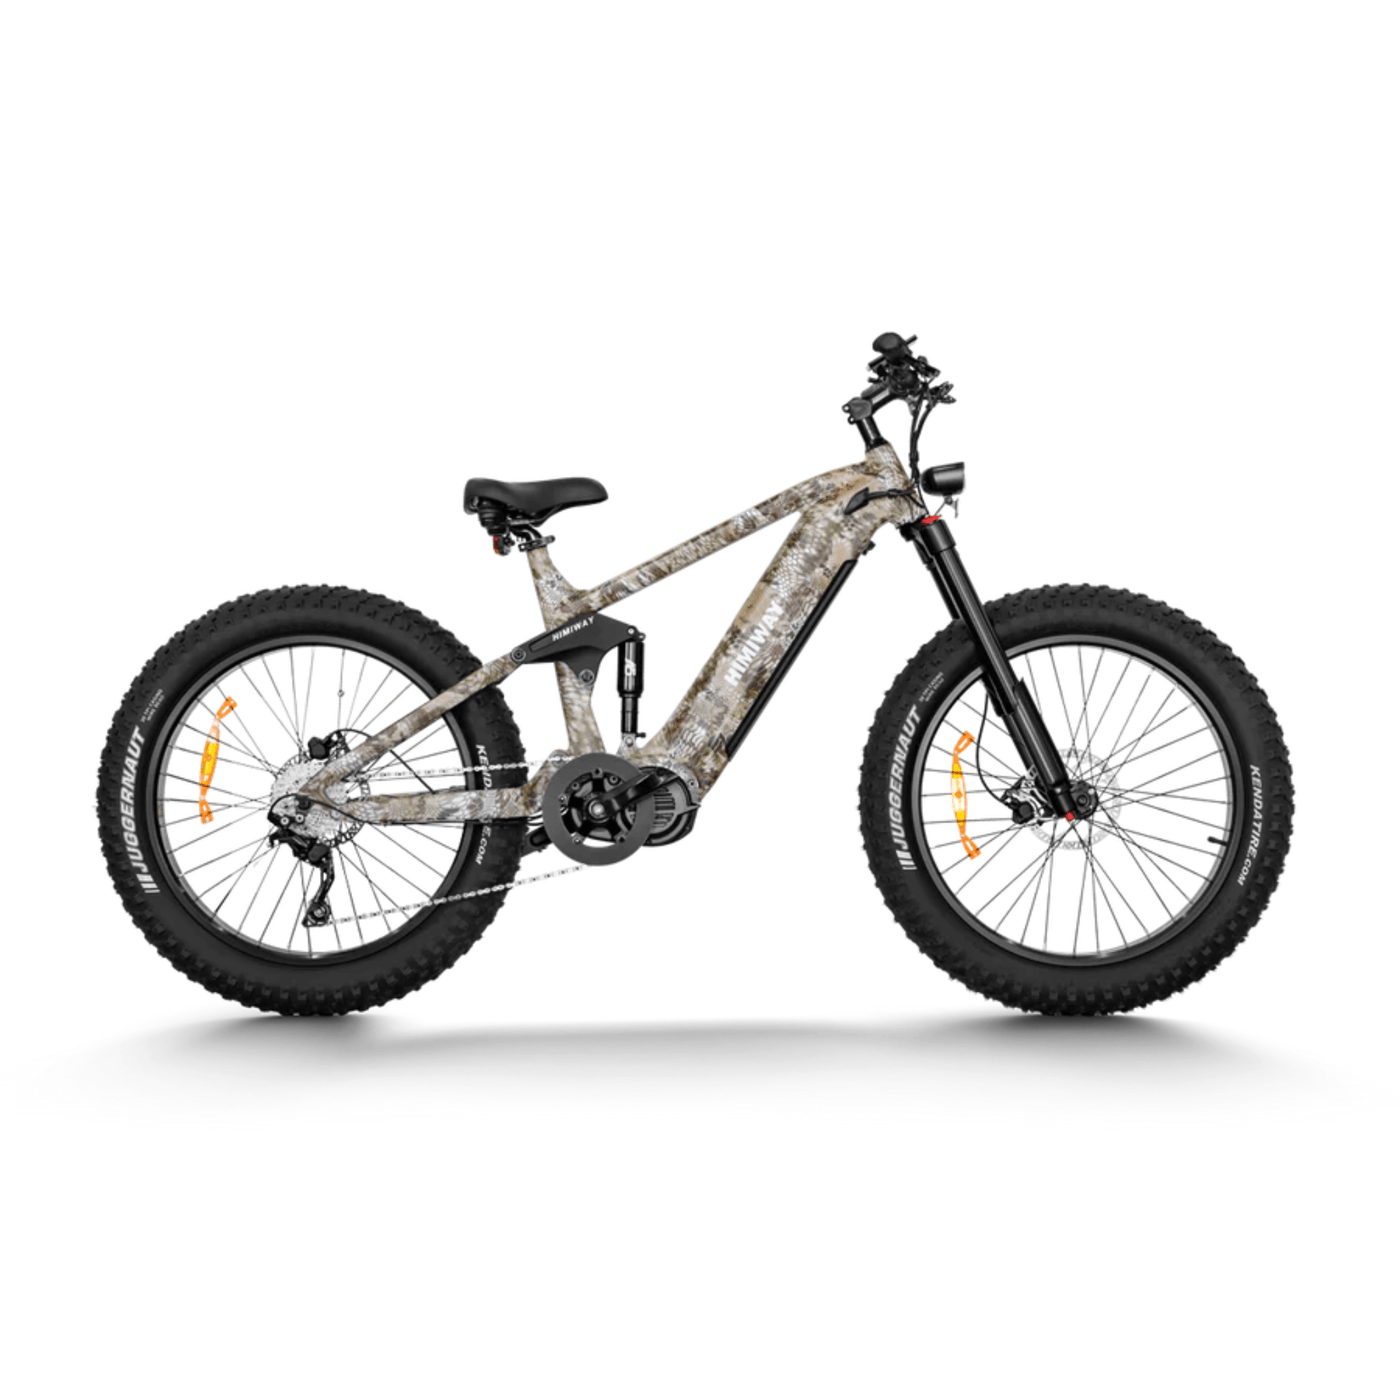 Himiway Cobra Pro 1000W Fat Tire Electric Bike - Rider Cycles 